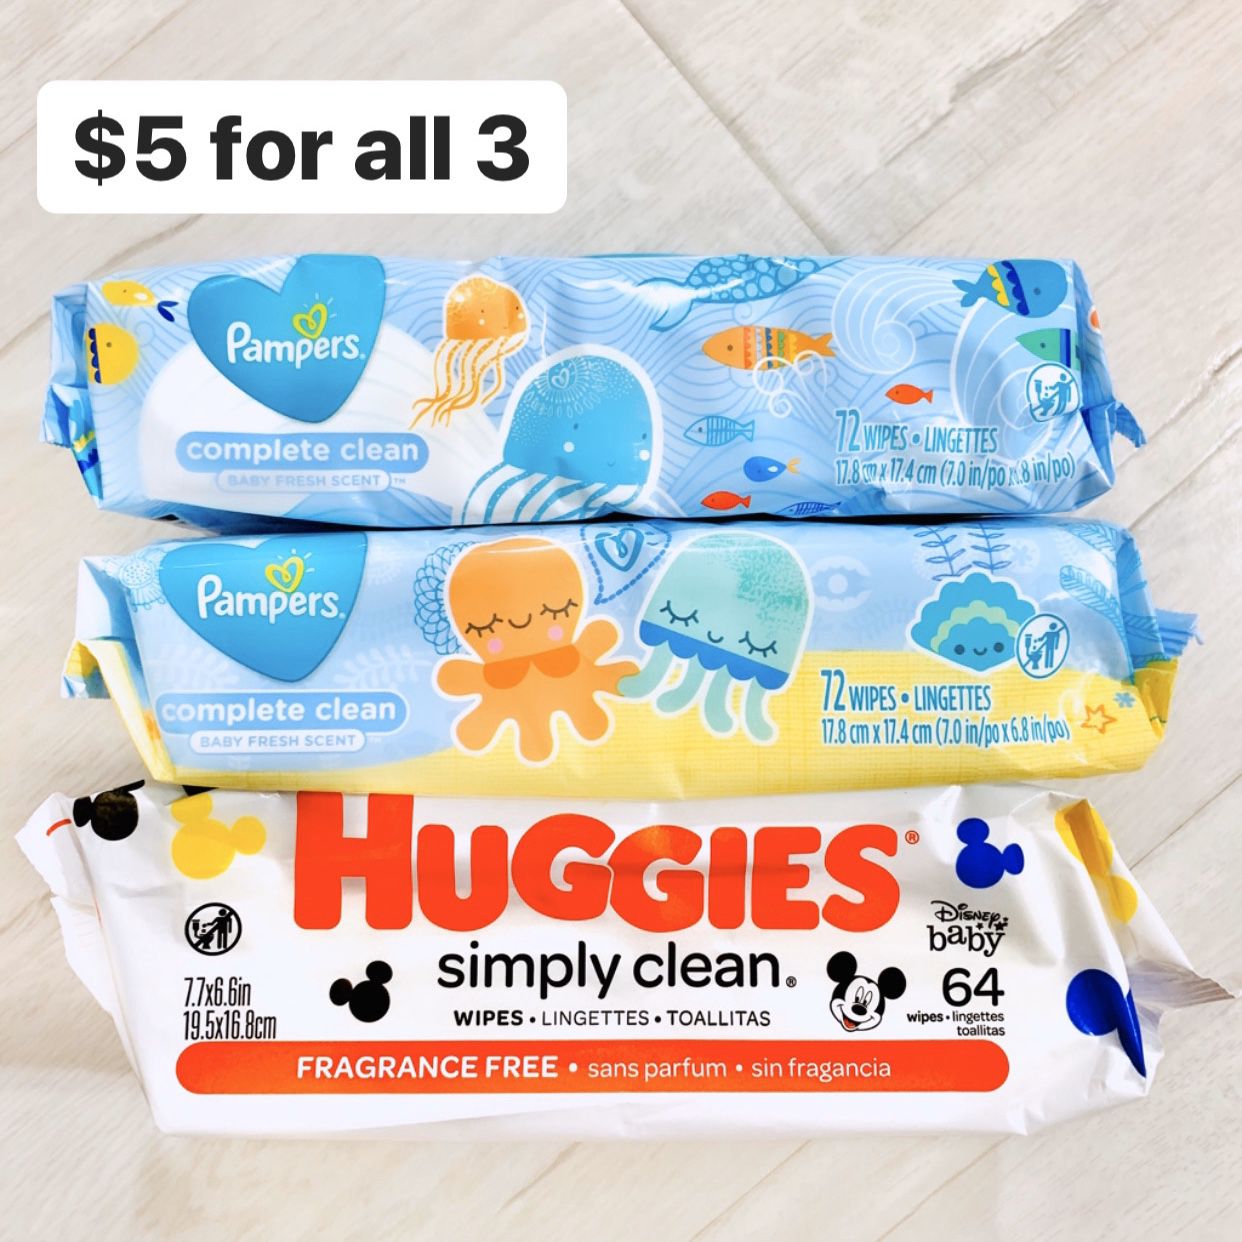 2 Packs Pampers Complete Clean Baby Fresh Scented Wipes + 1 Huggies Simply Clean Fragrance Free Wipes (208 wipes total) - $5 for all 3